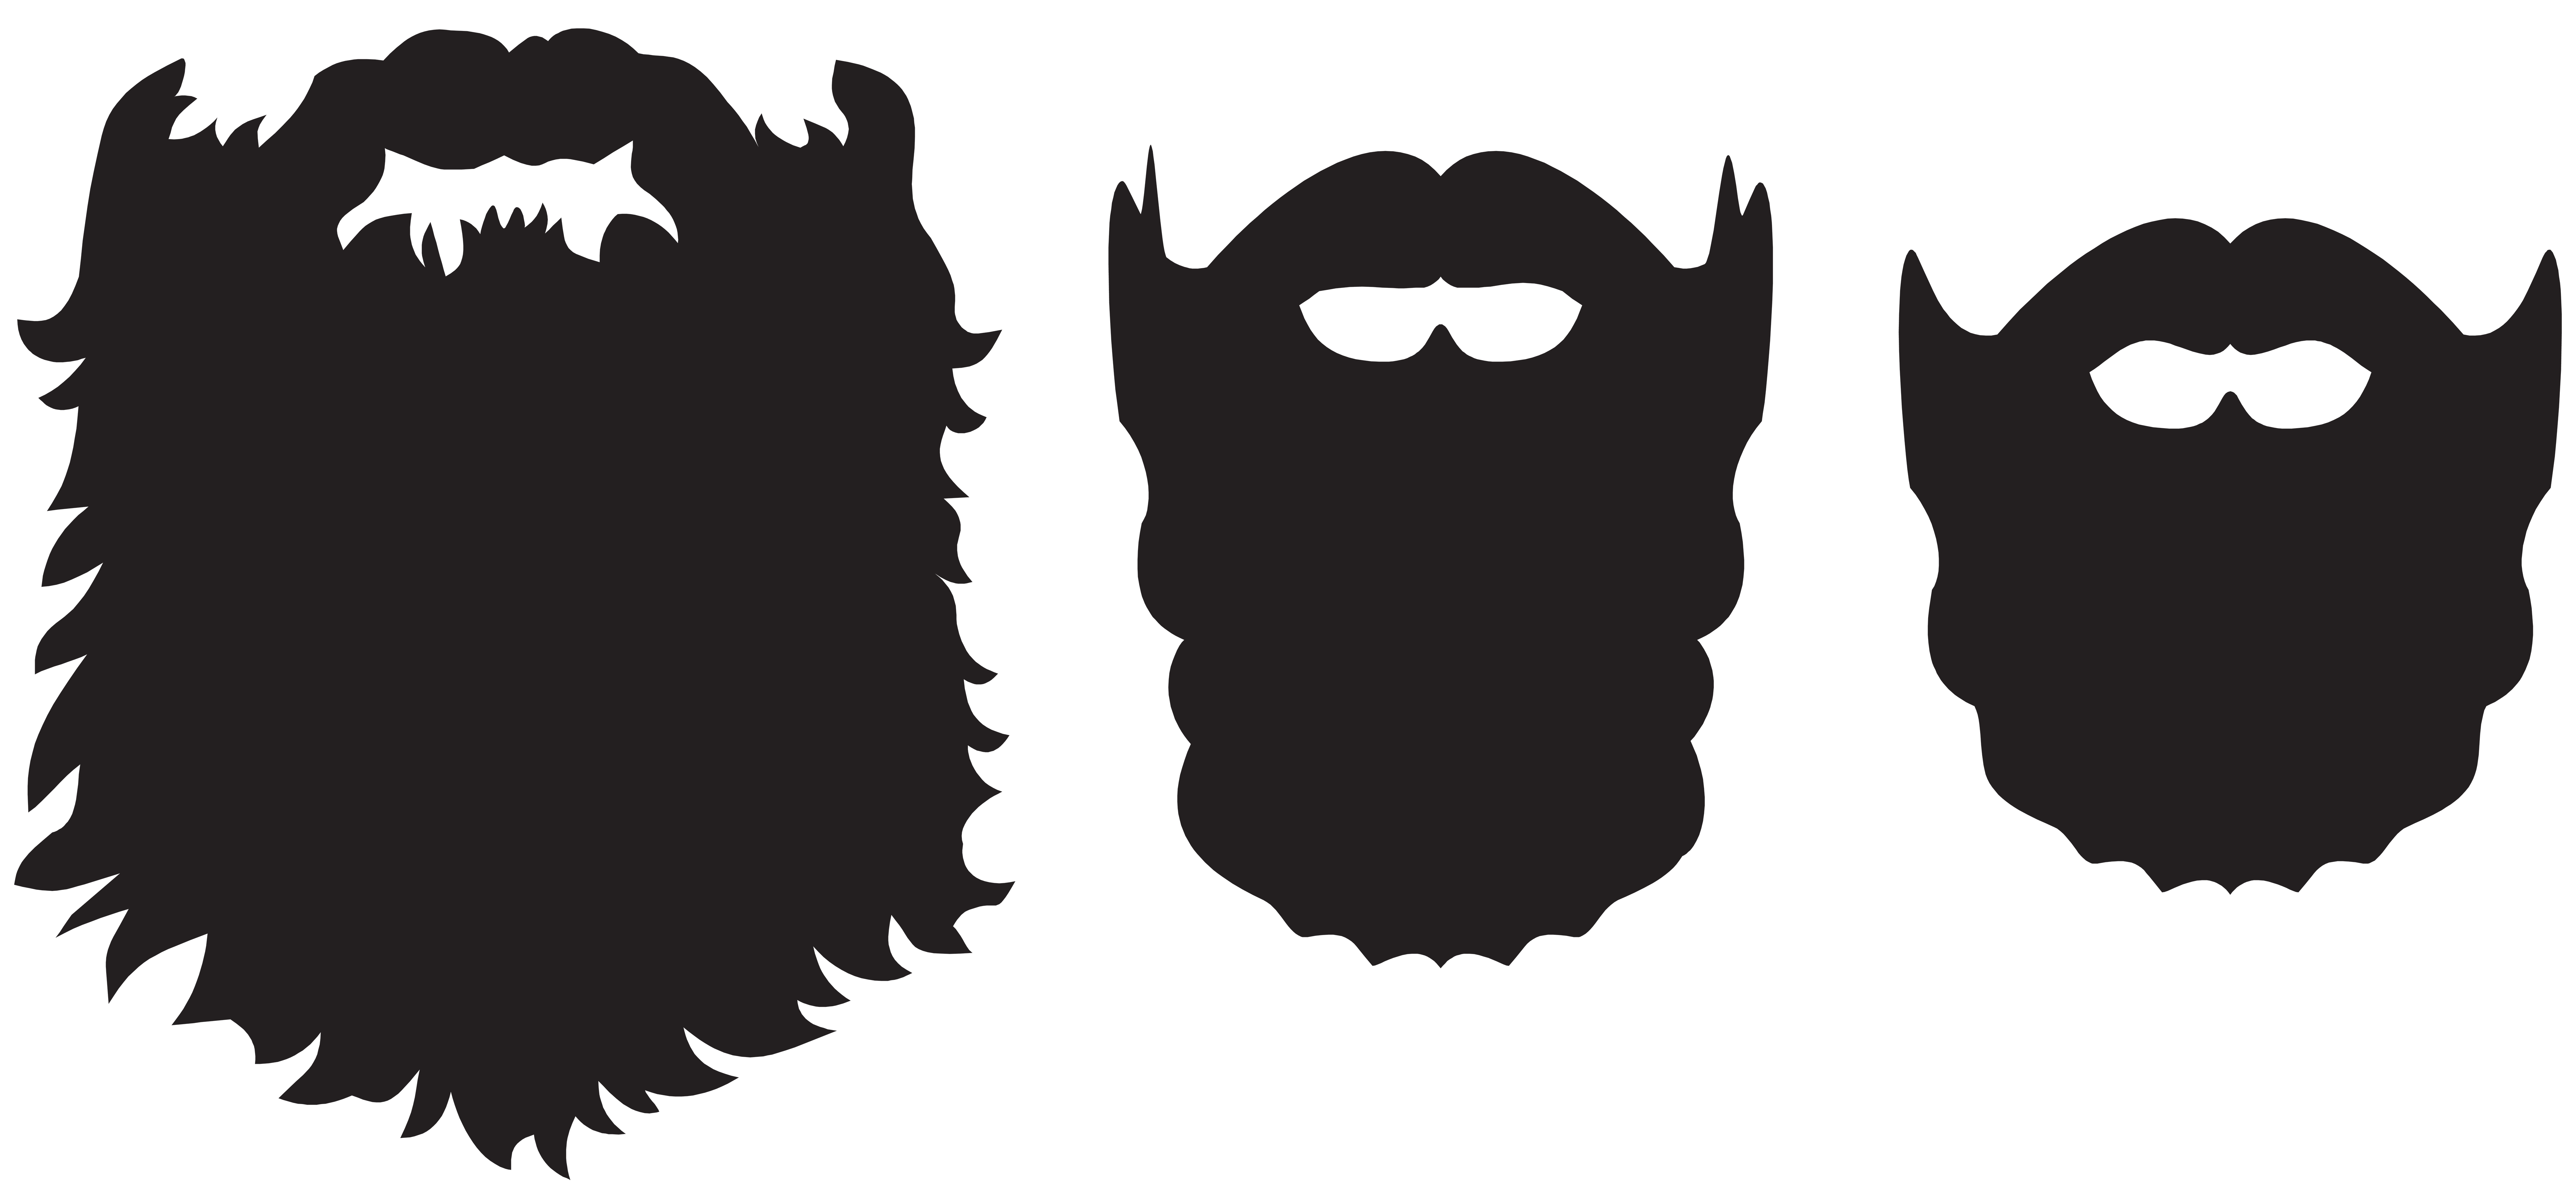 Download Beard Set PNG Clip Art Image | Gallery Yopriceville - High ...